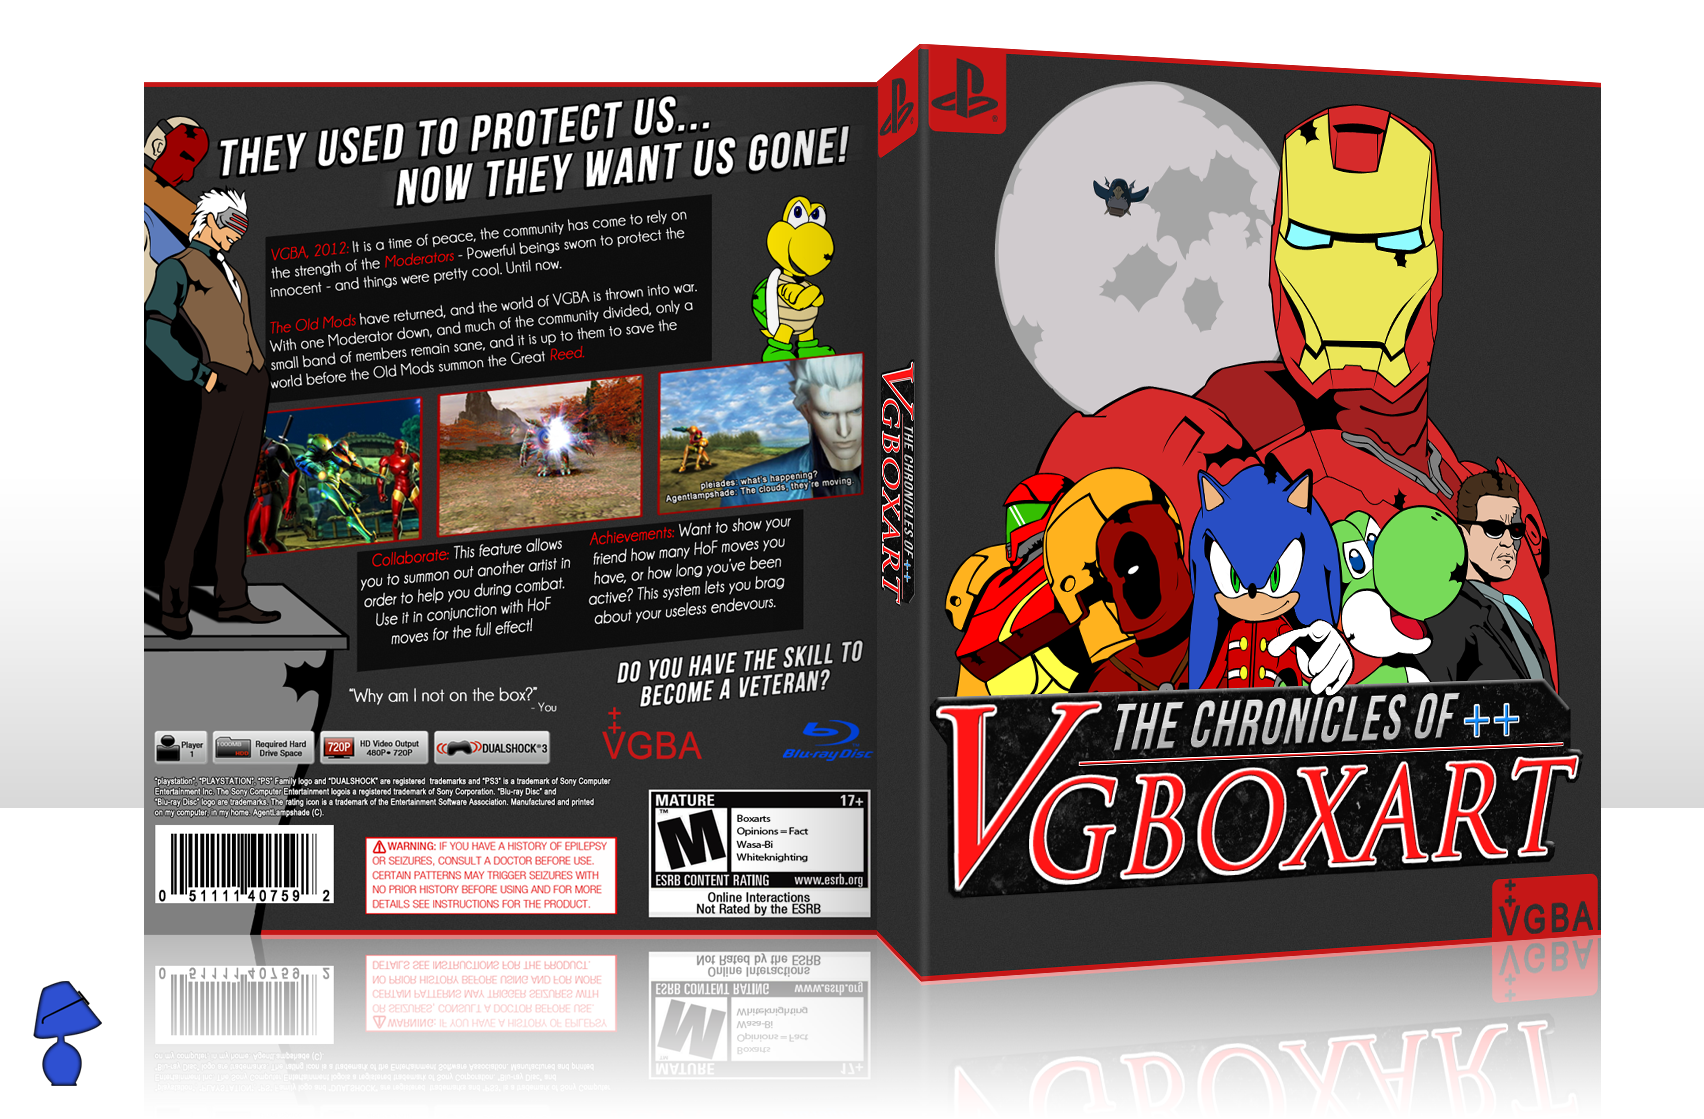 The Chronicles of Vgboxart box cover